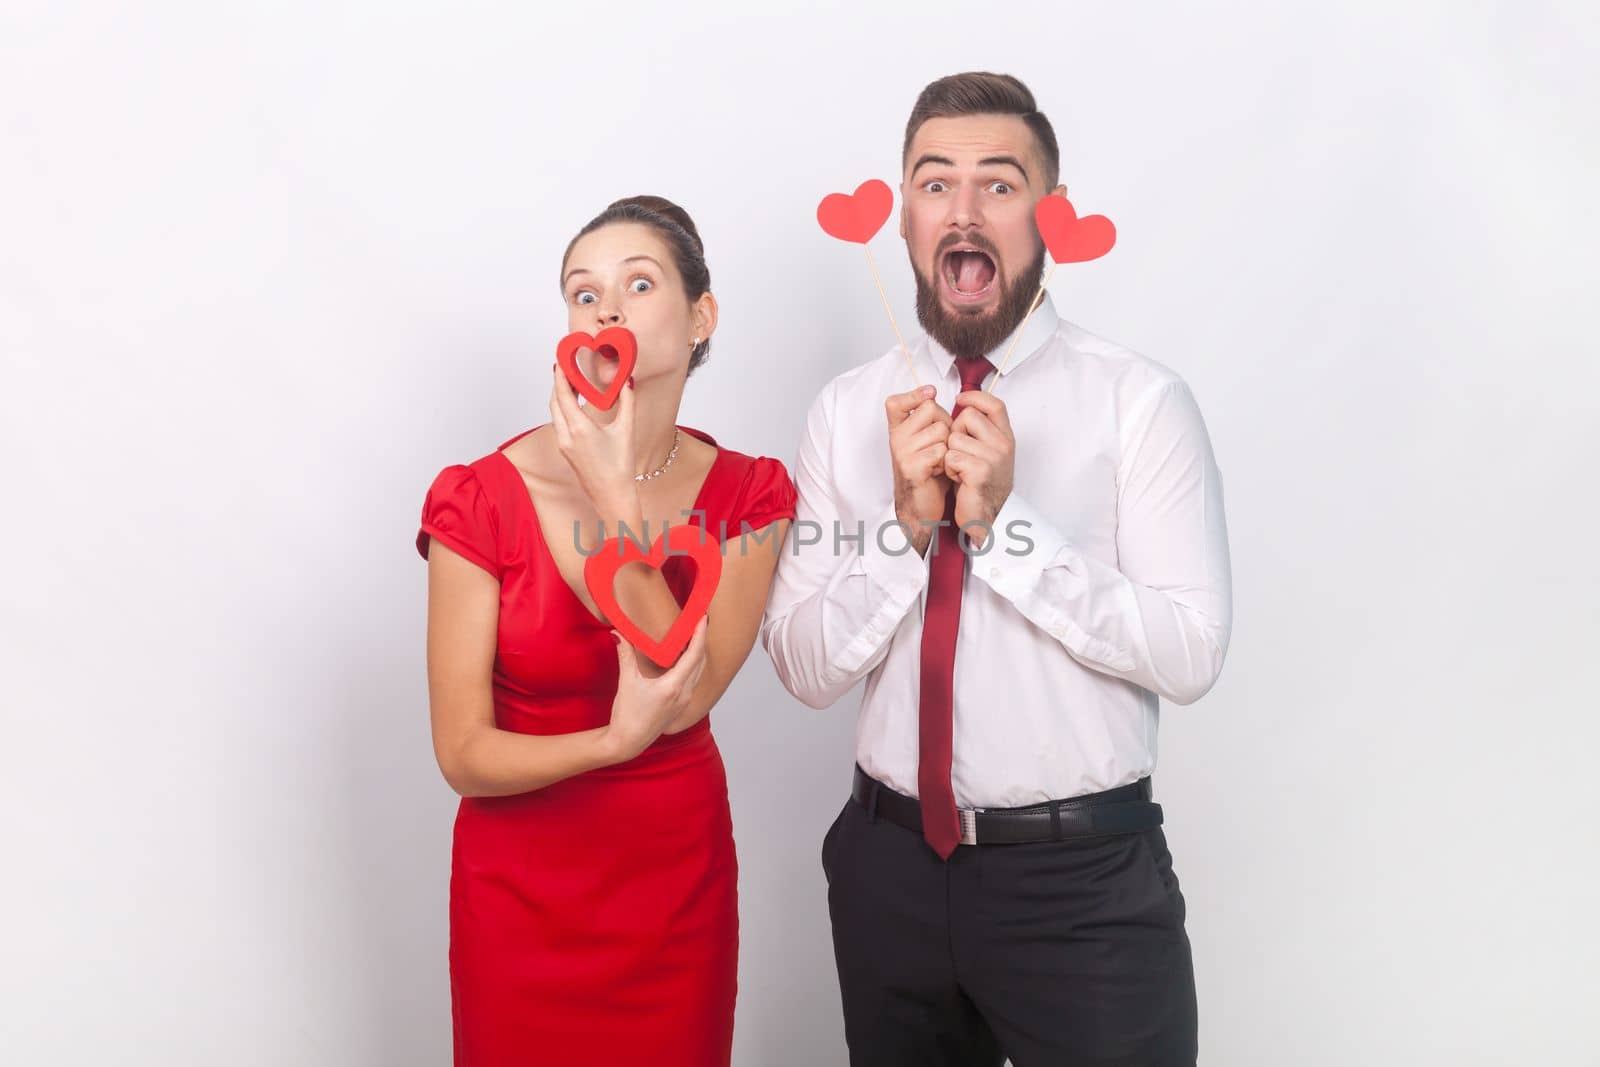 Portrait of funny screaming man in white shirt and woman in red dress with pout lips standing together, holding hear figures. Indoor studio shot isolated on gray background.